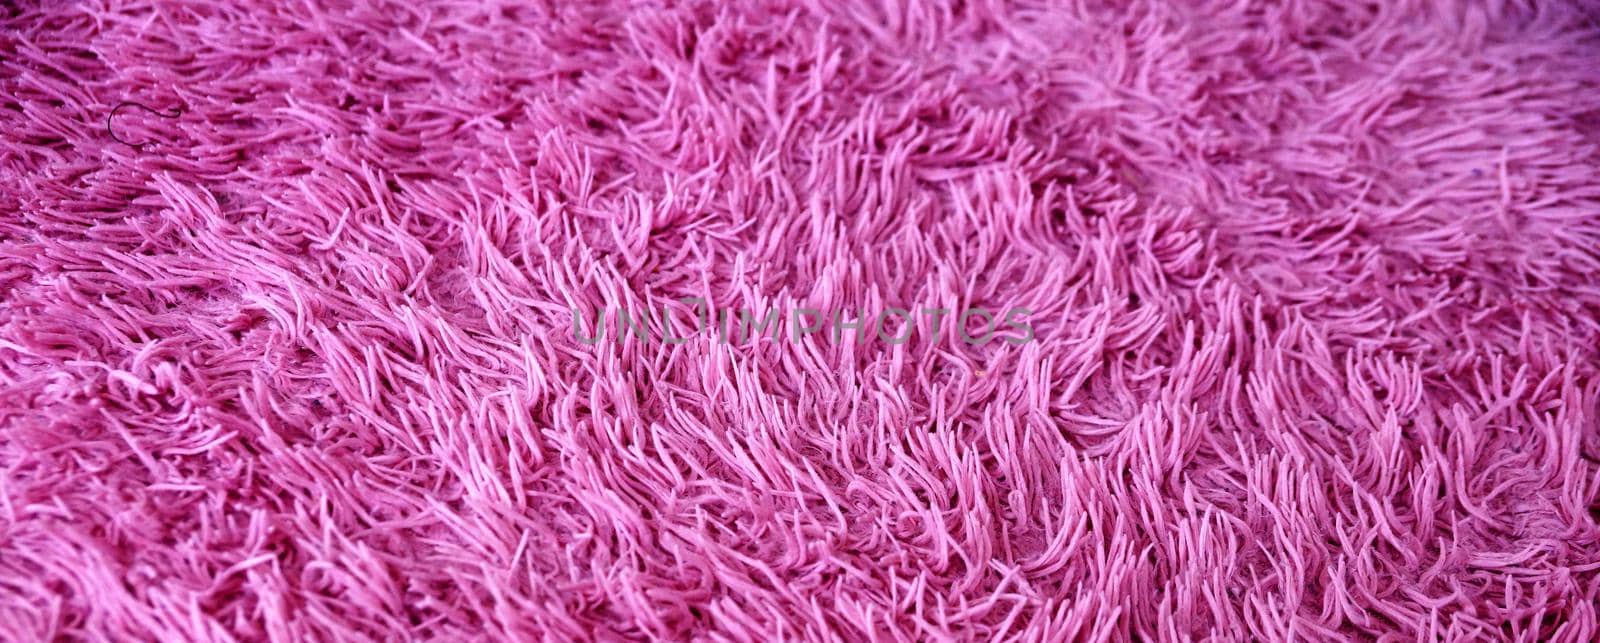 faux pink fur close-up for textile background